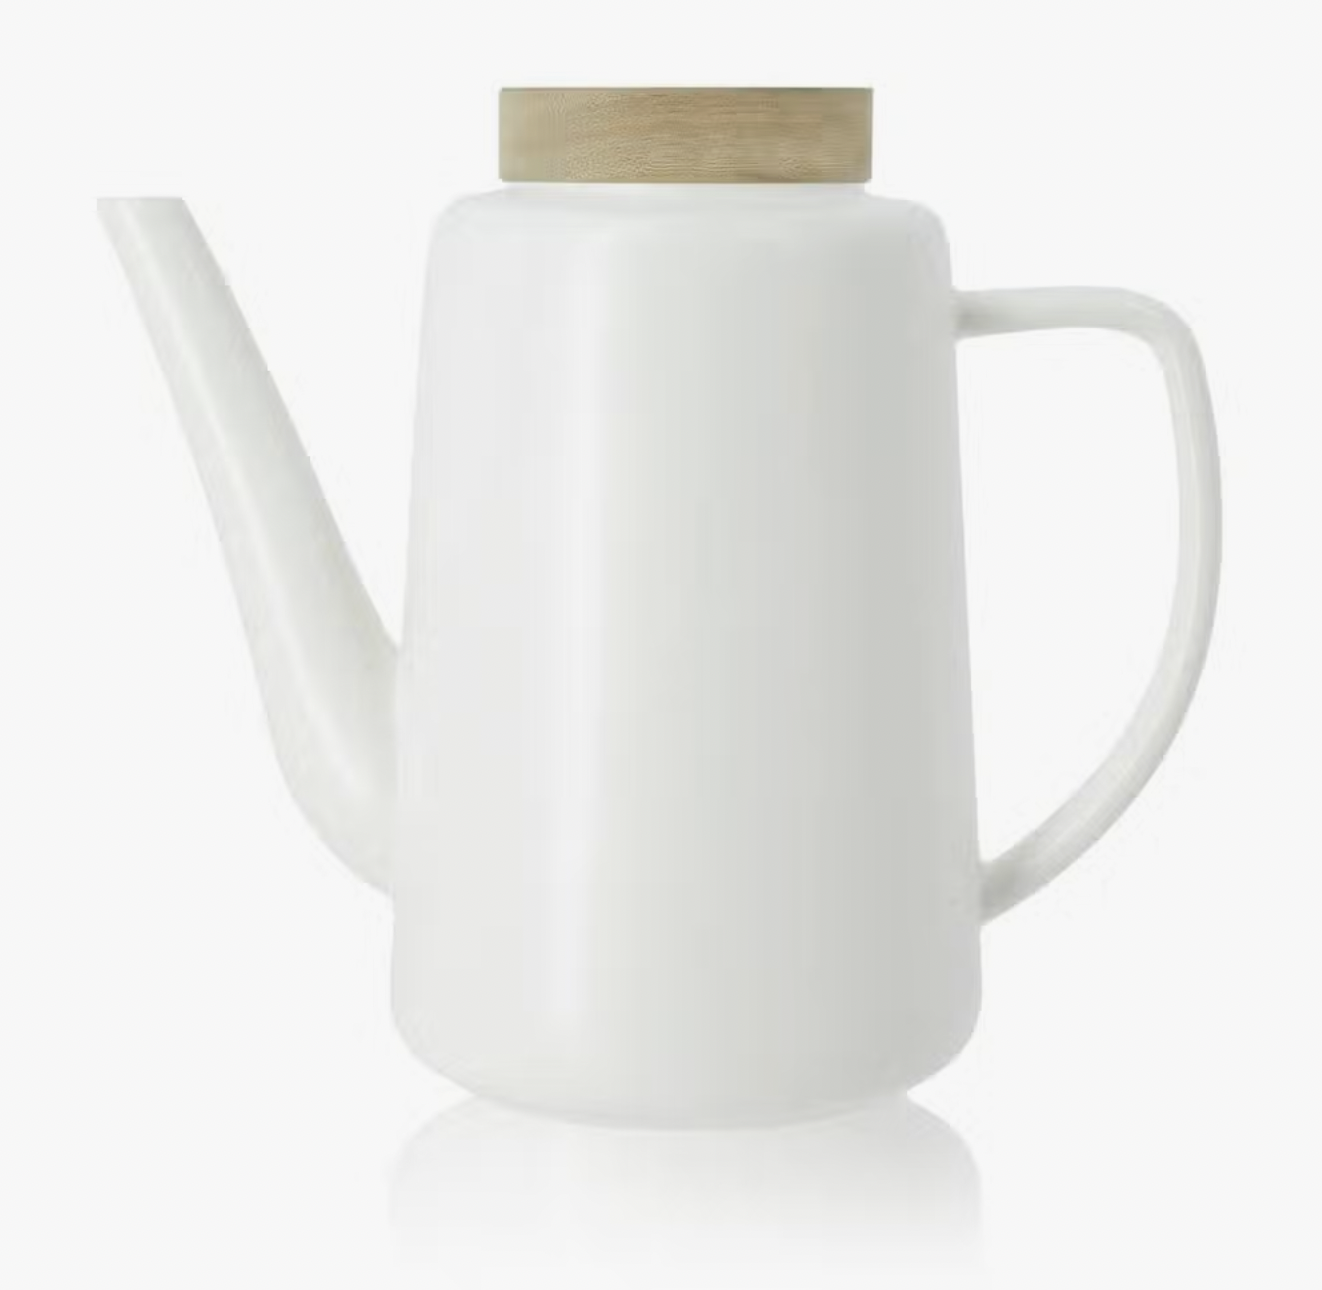 Ogo Living Enzo Teapot in White Porcelain and Acacia Lid 1.2 L